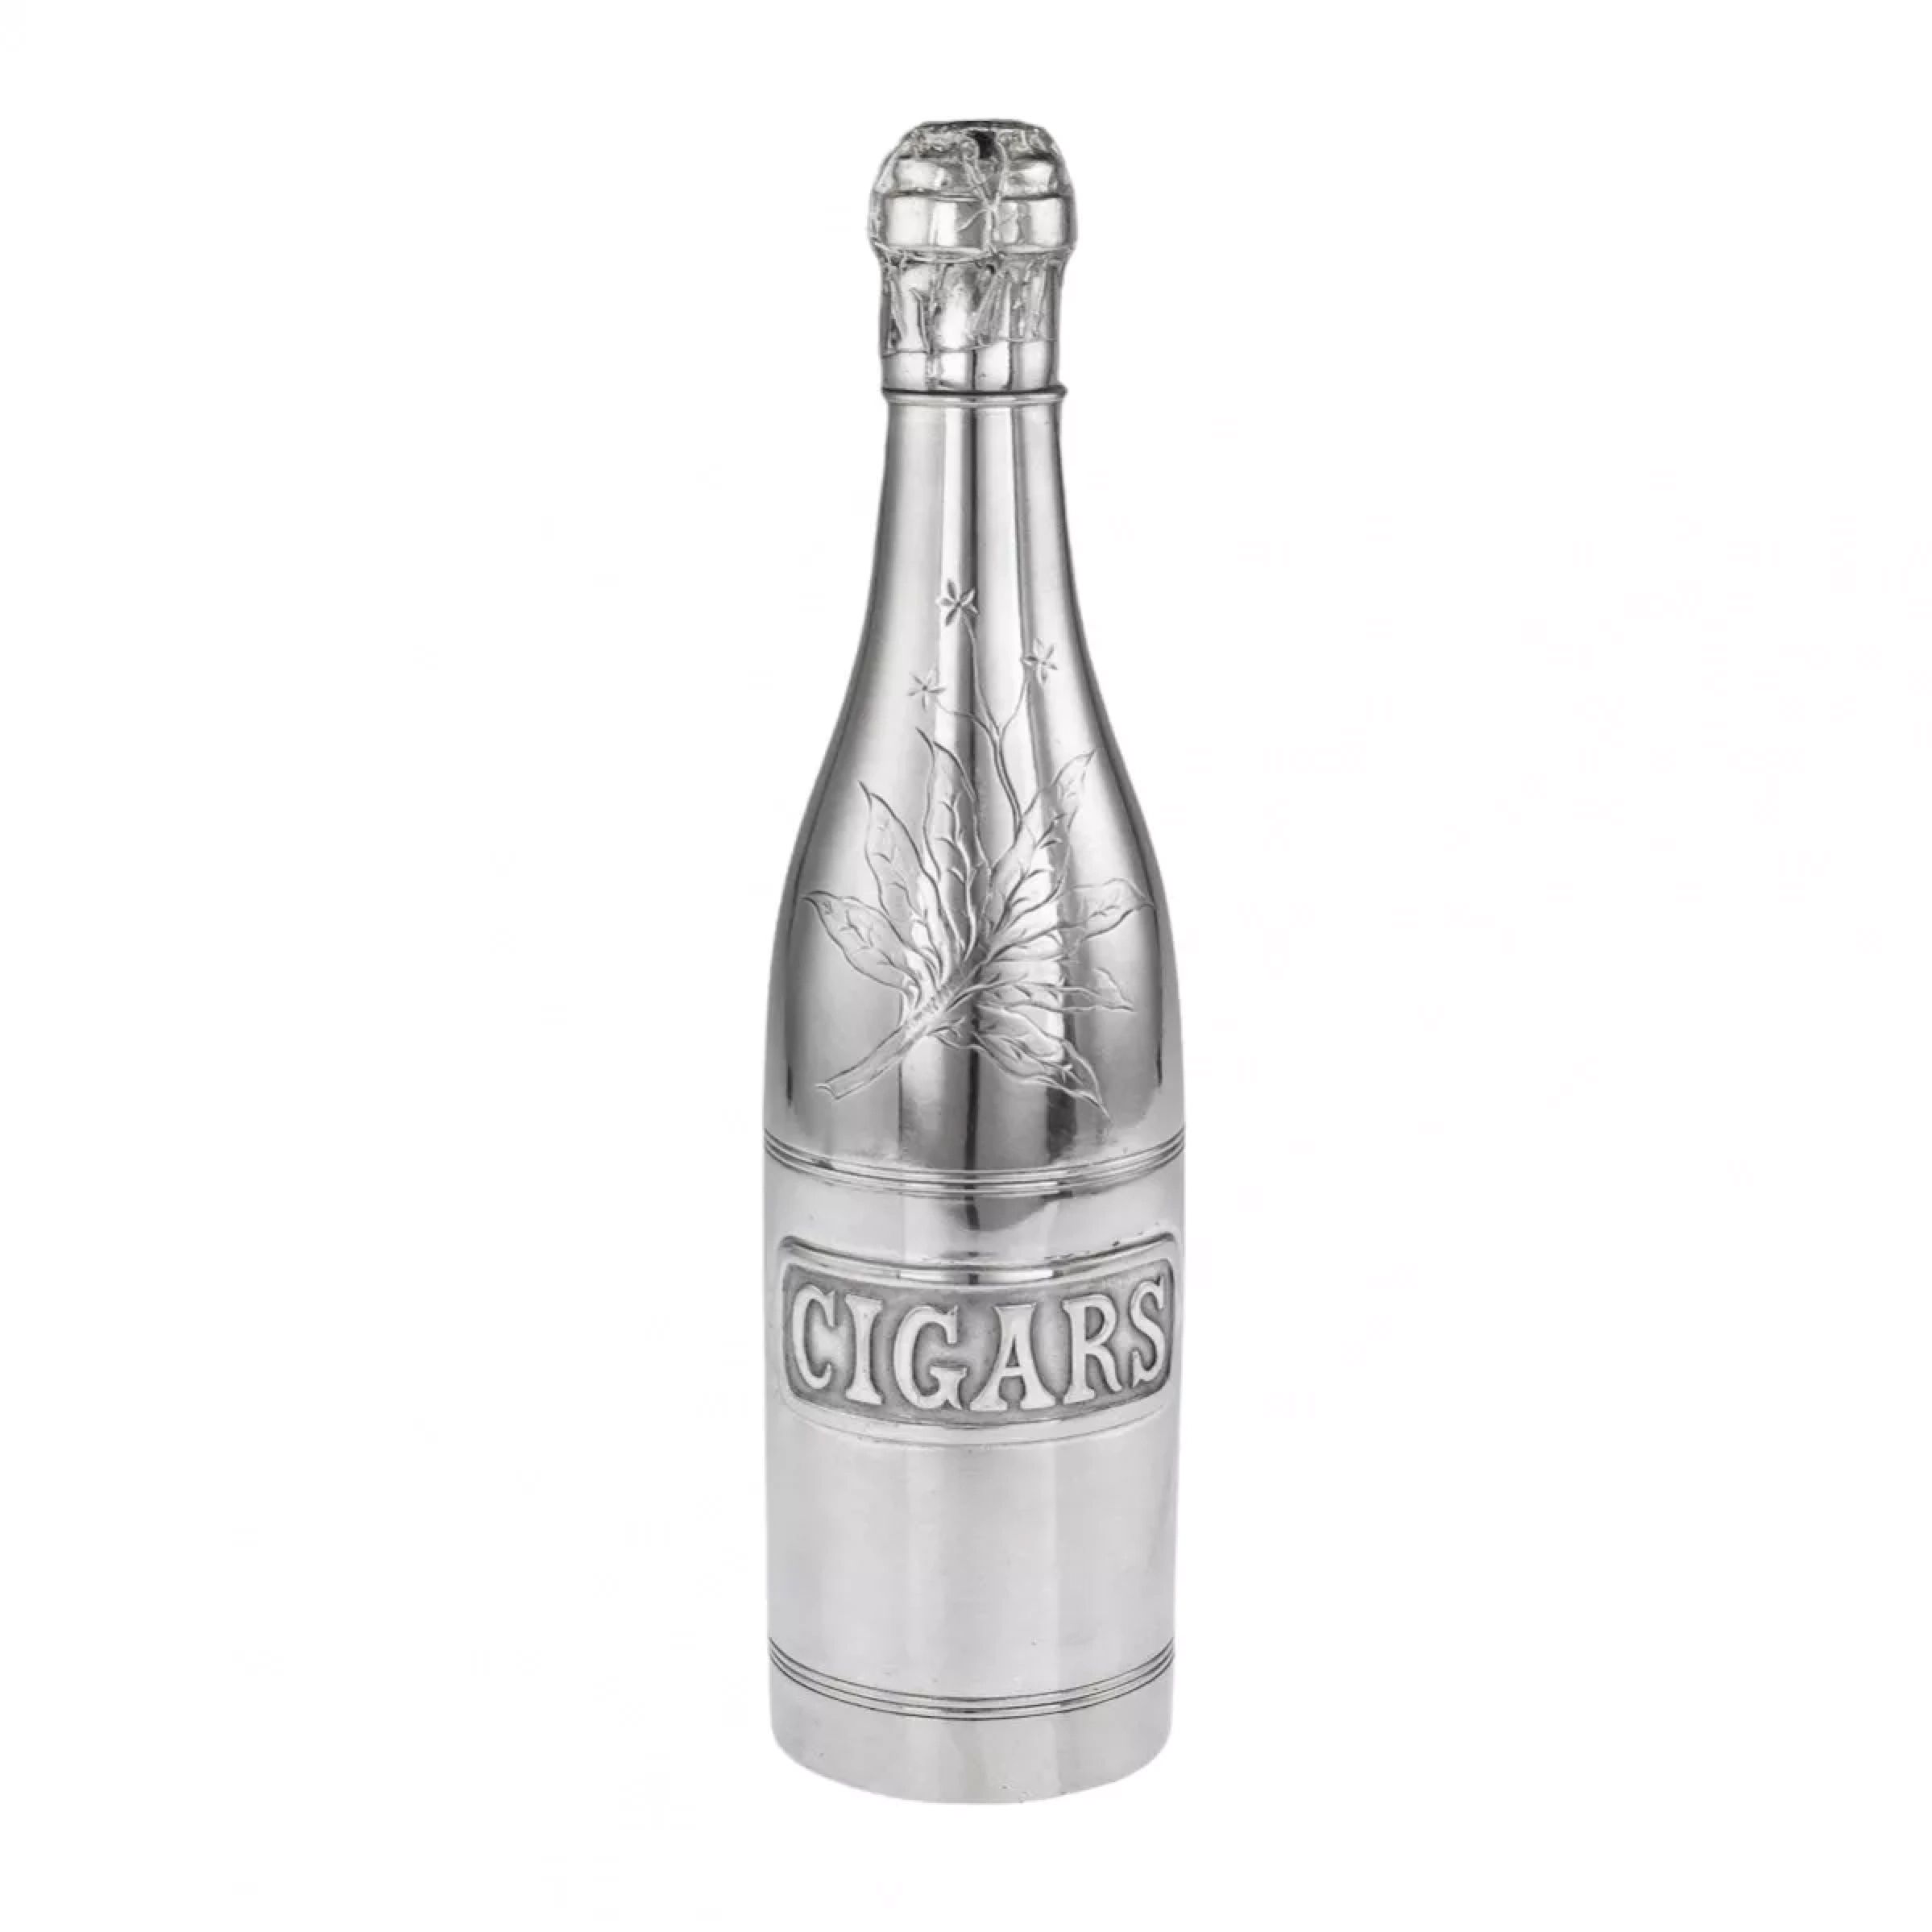 Silver-plated-tobacco-holder-in-the-shape-of-a-champagne-bottle-